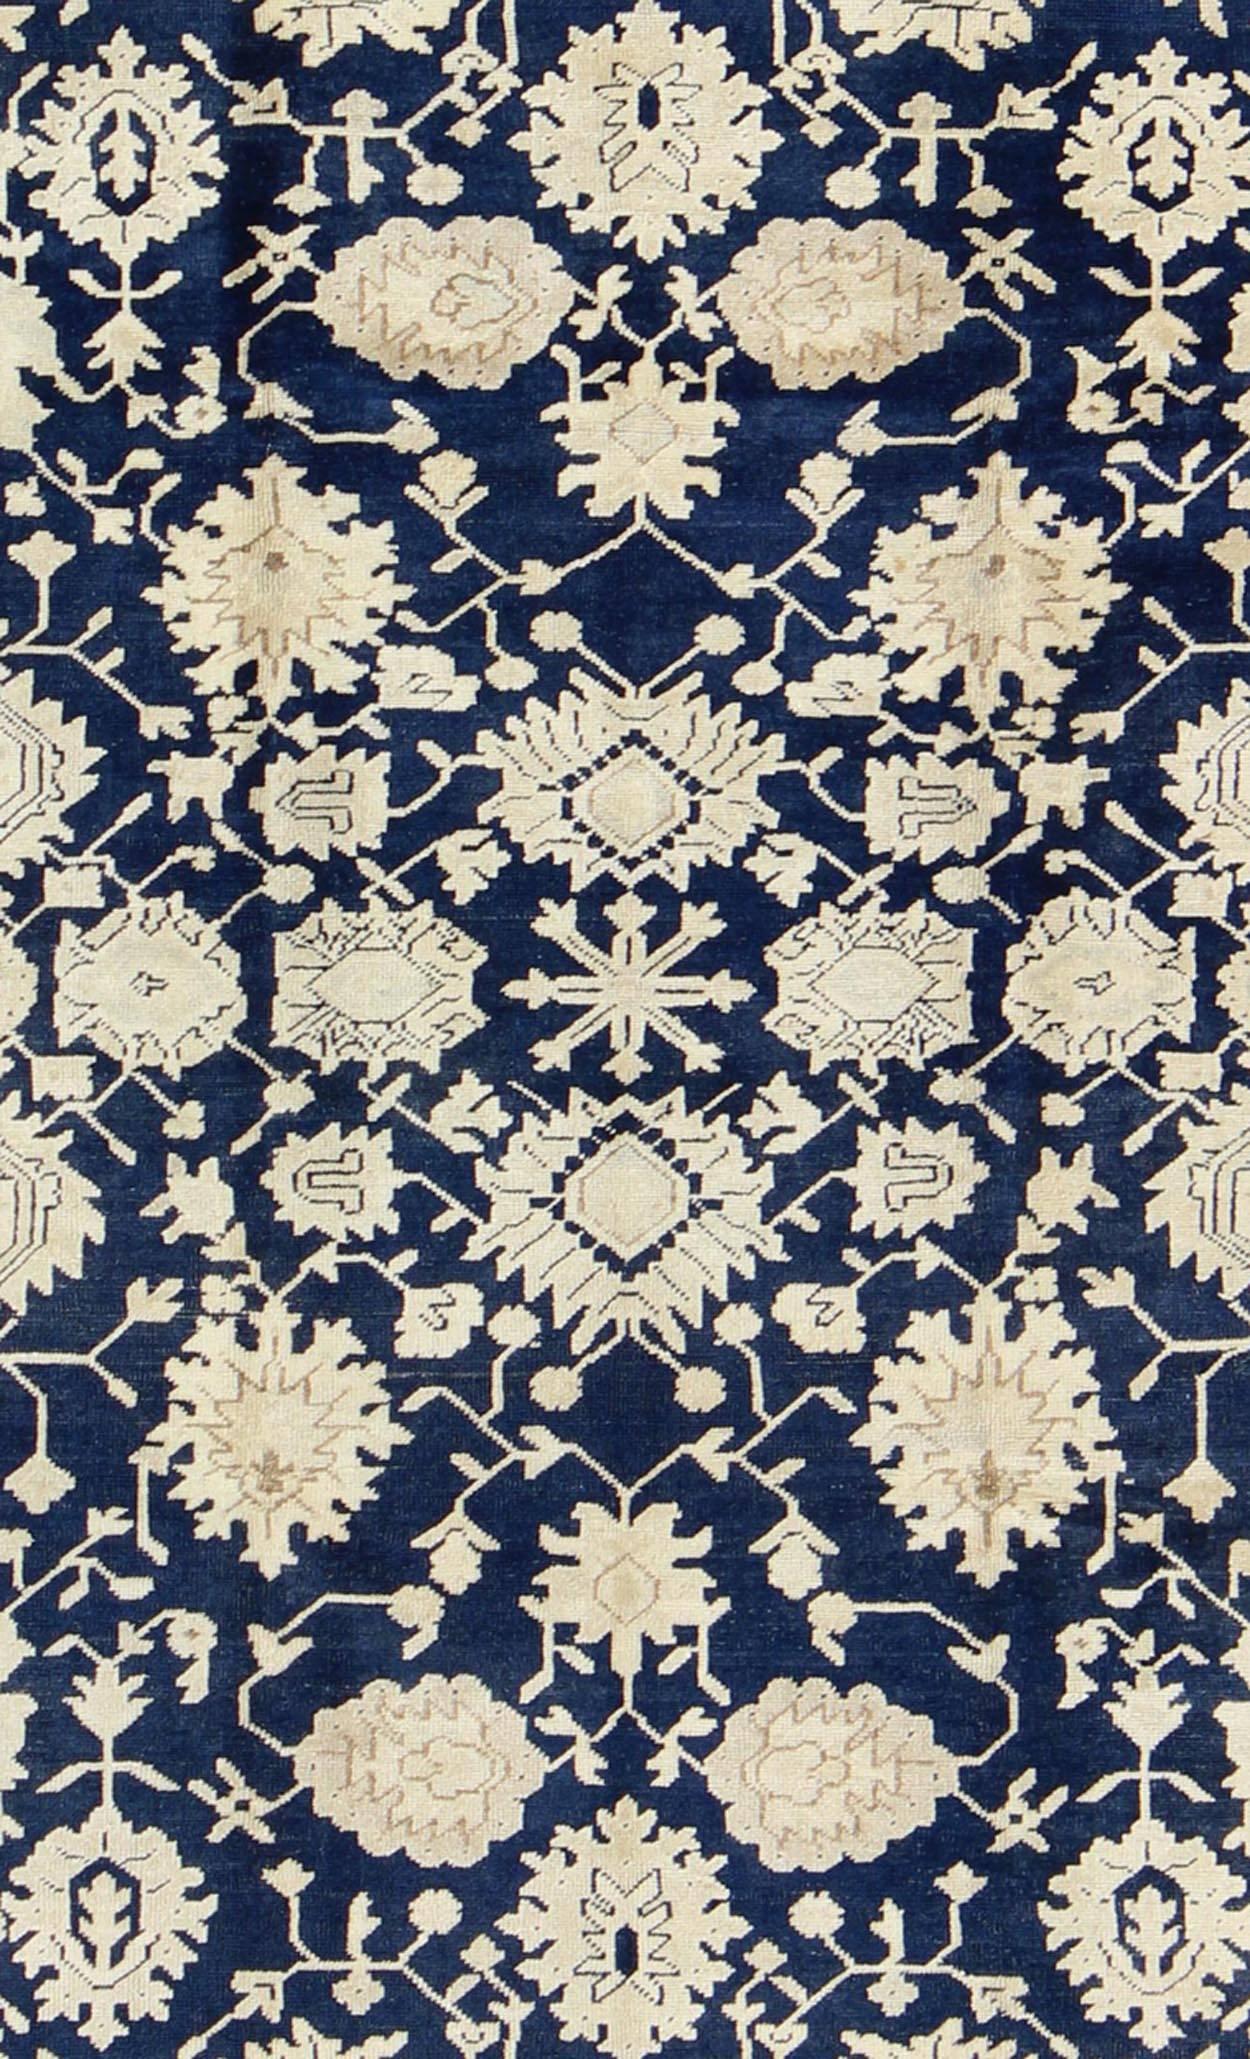 Tabriz Unique Turkish Oushak Rug with Floral Design in Dark Blue, Cream and Light Brown For Sale